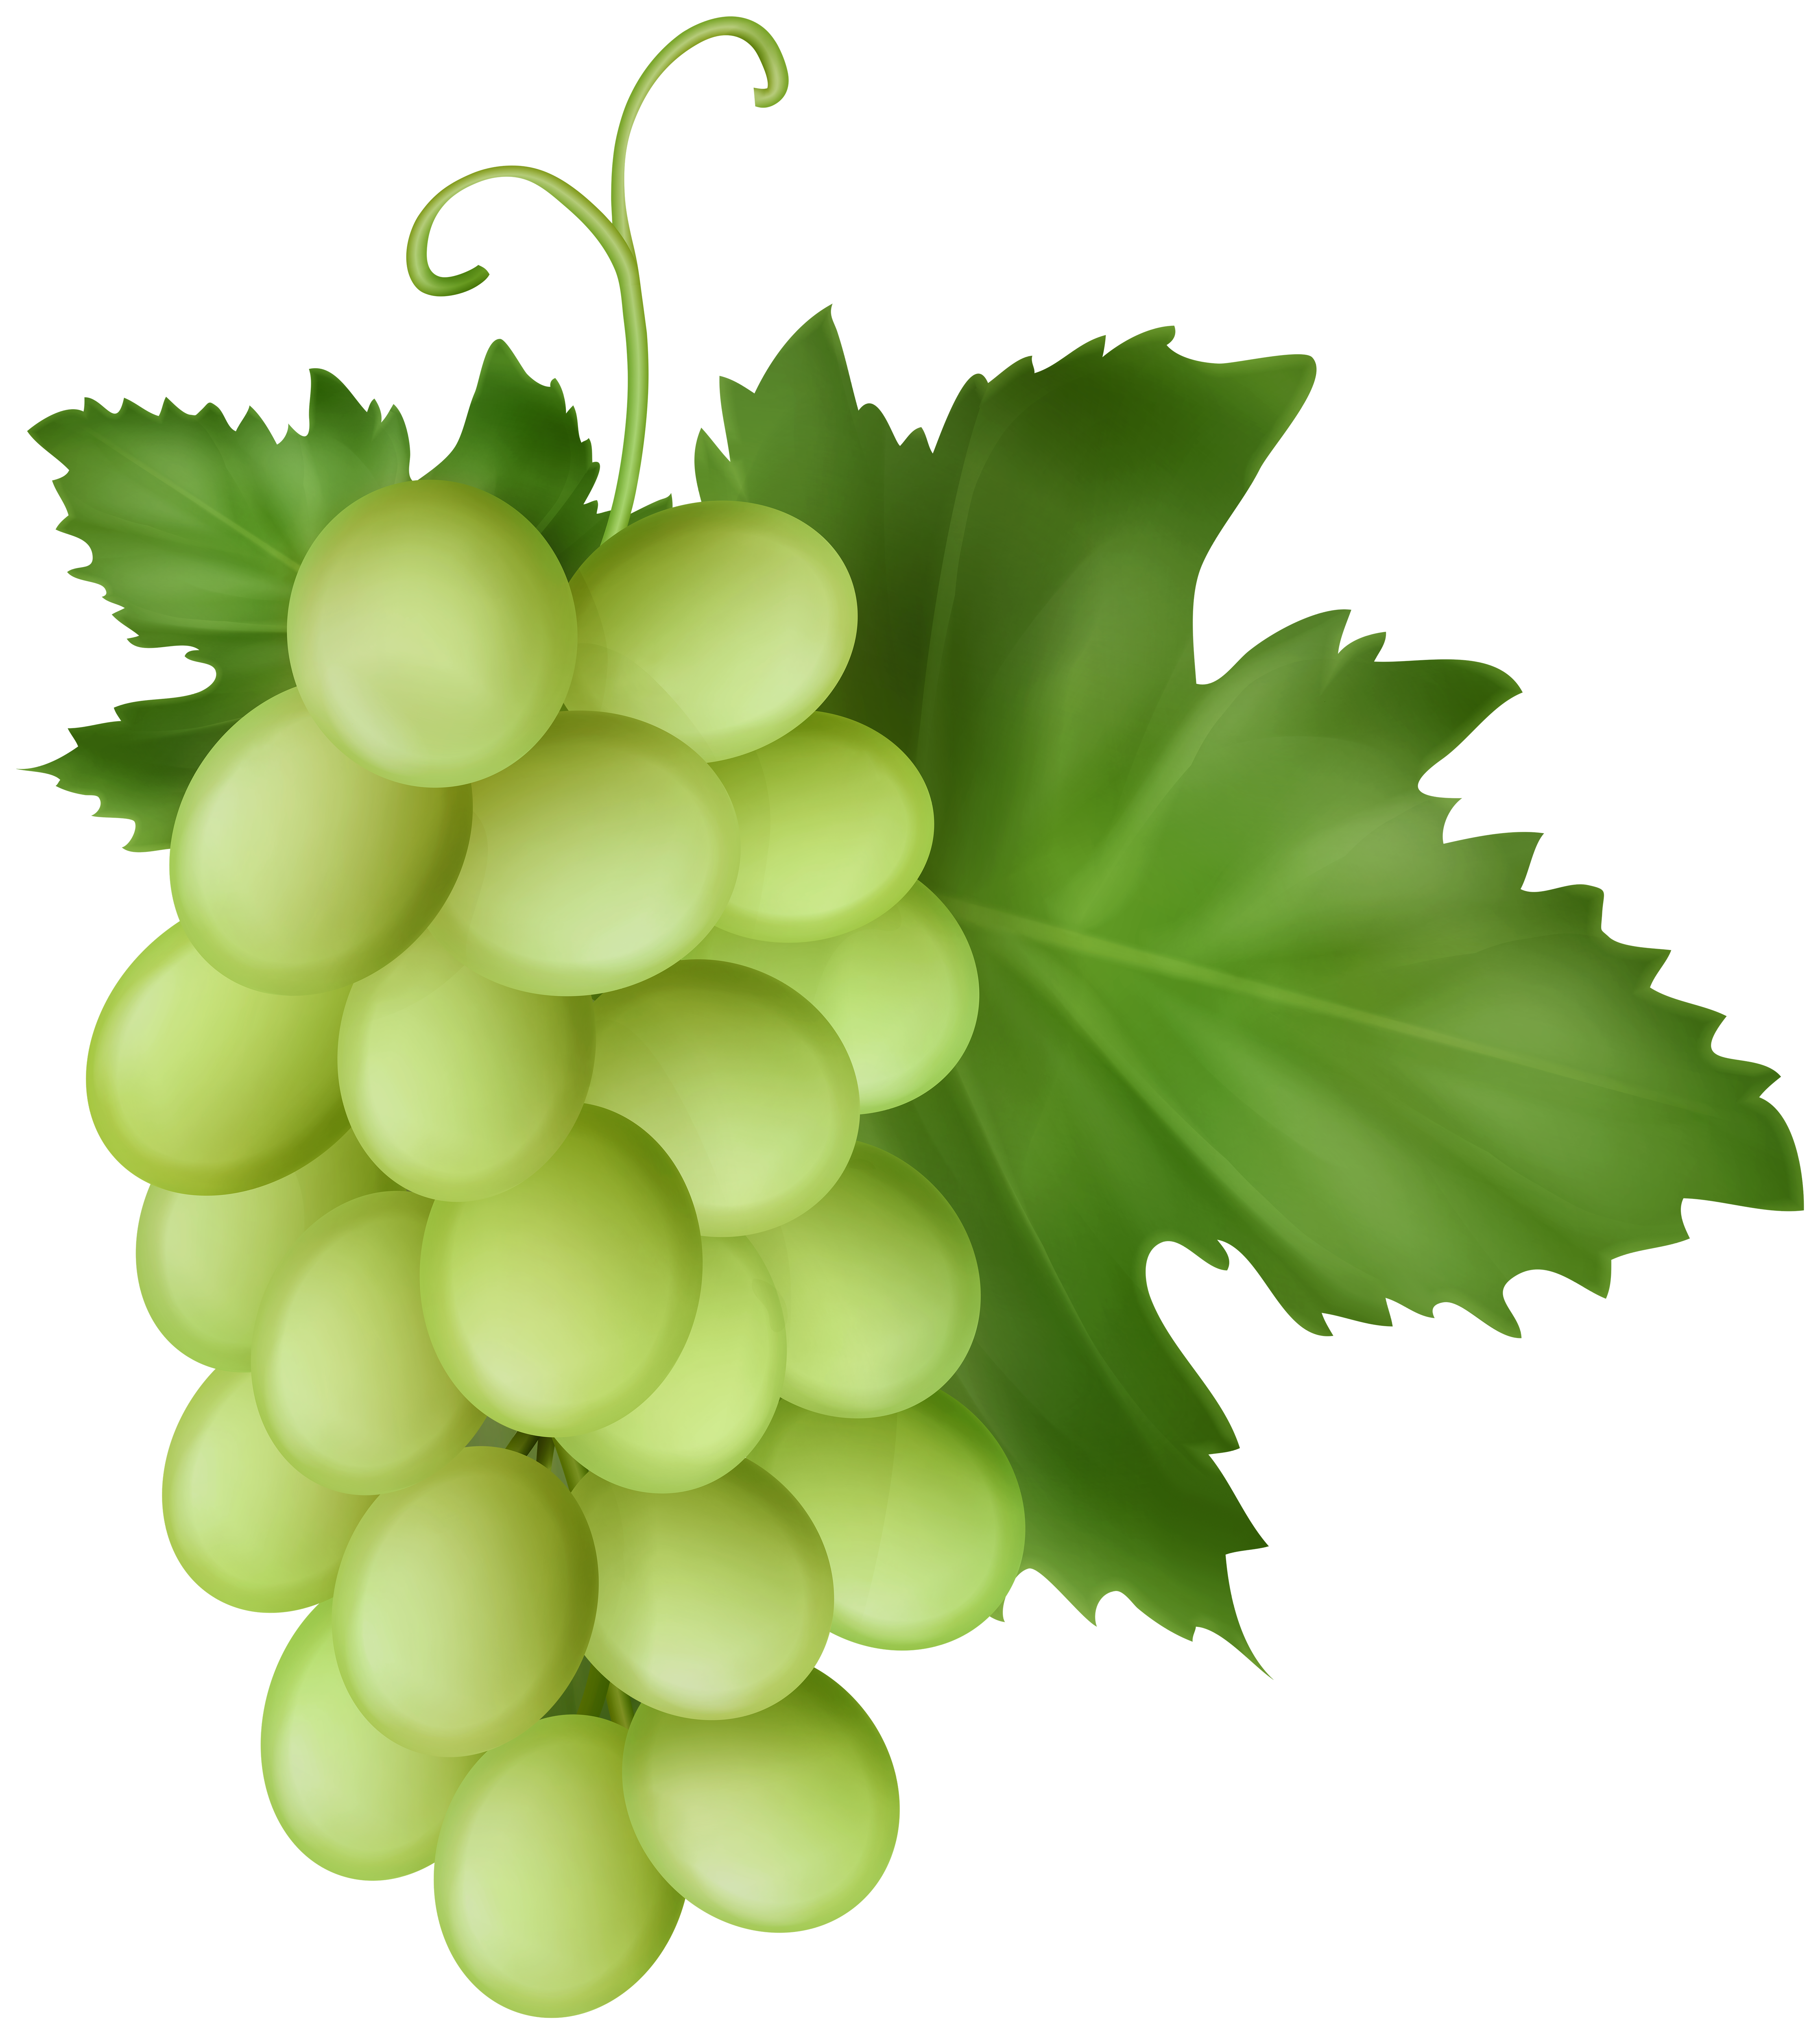 White Grapes Transparent Image | Gallery Yopriceville - High 